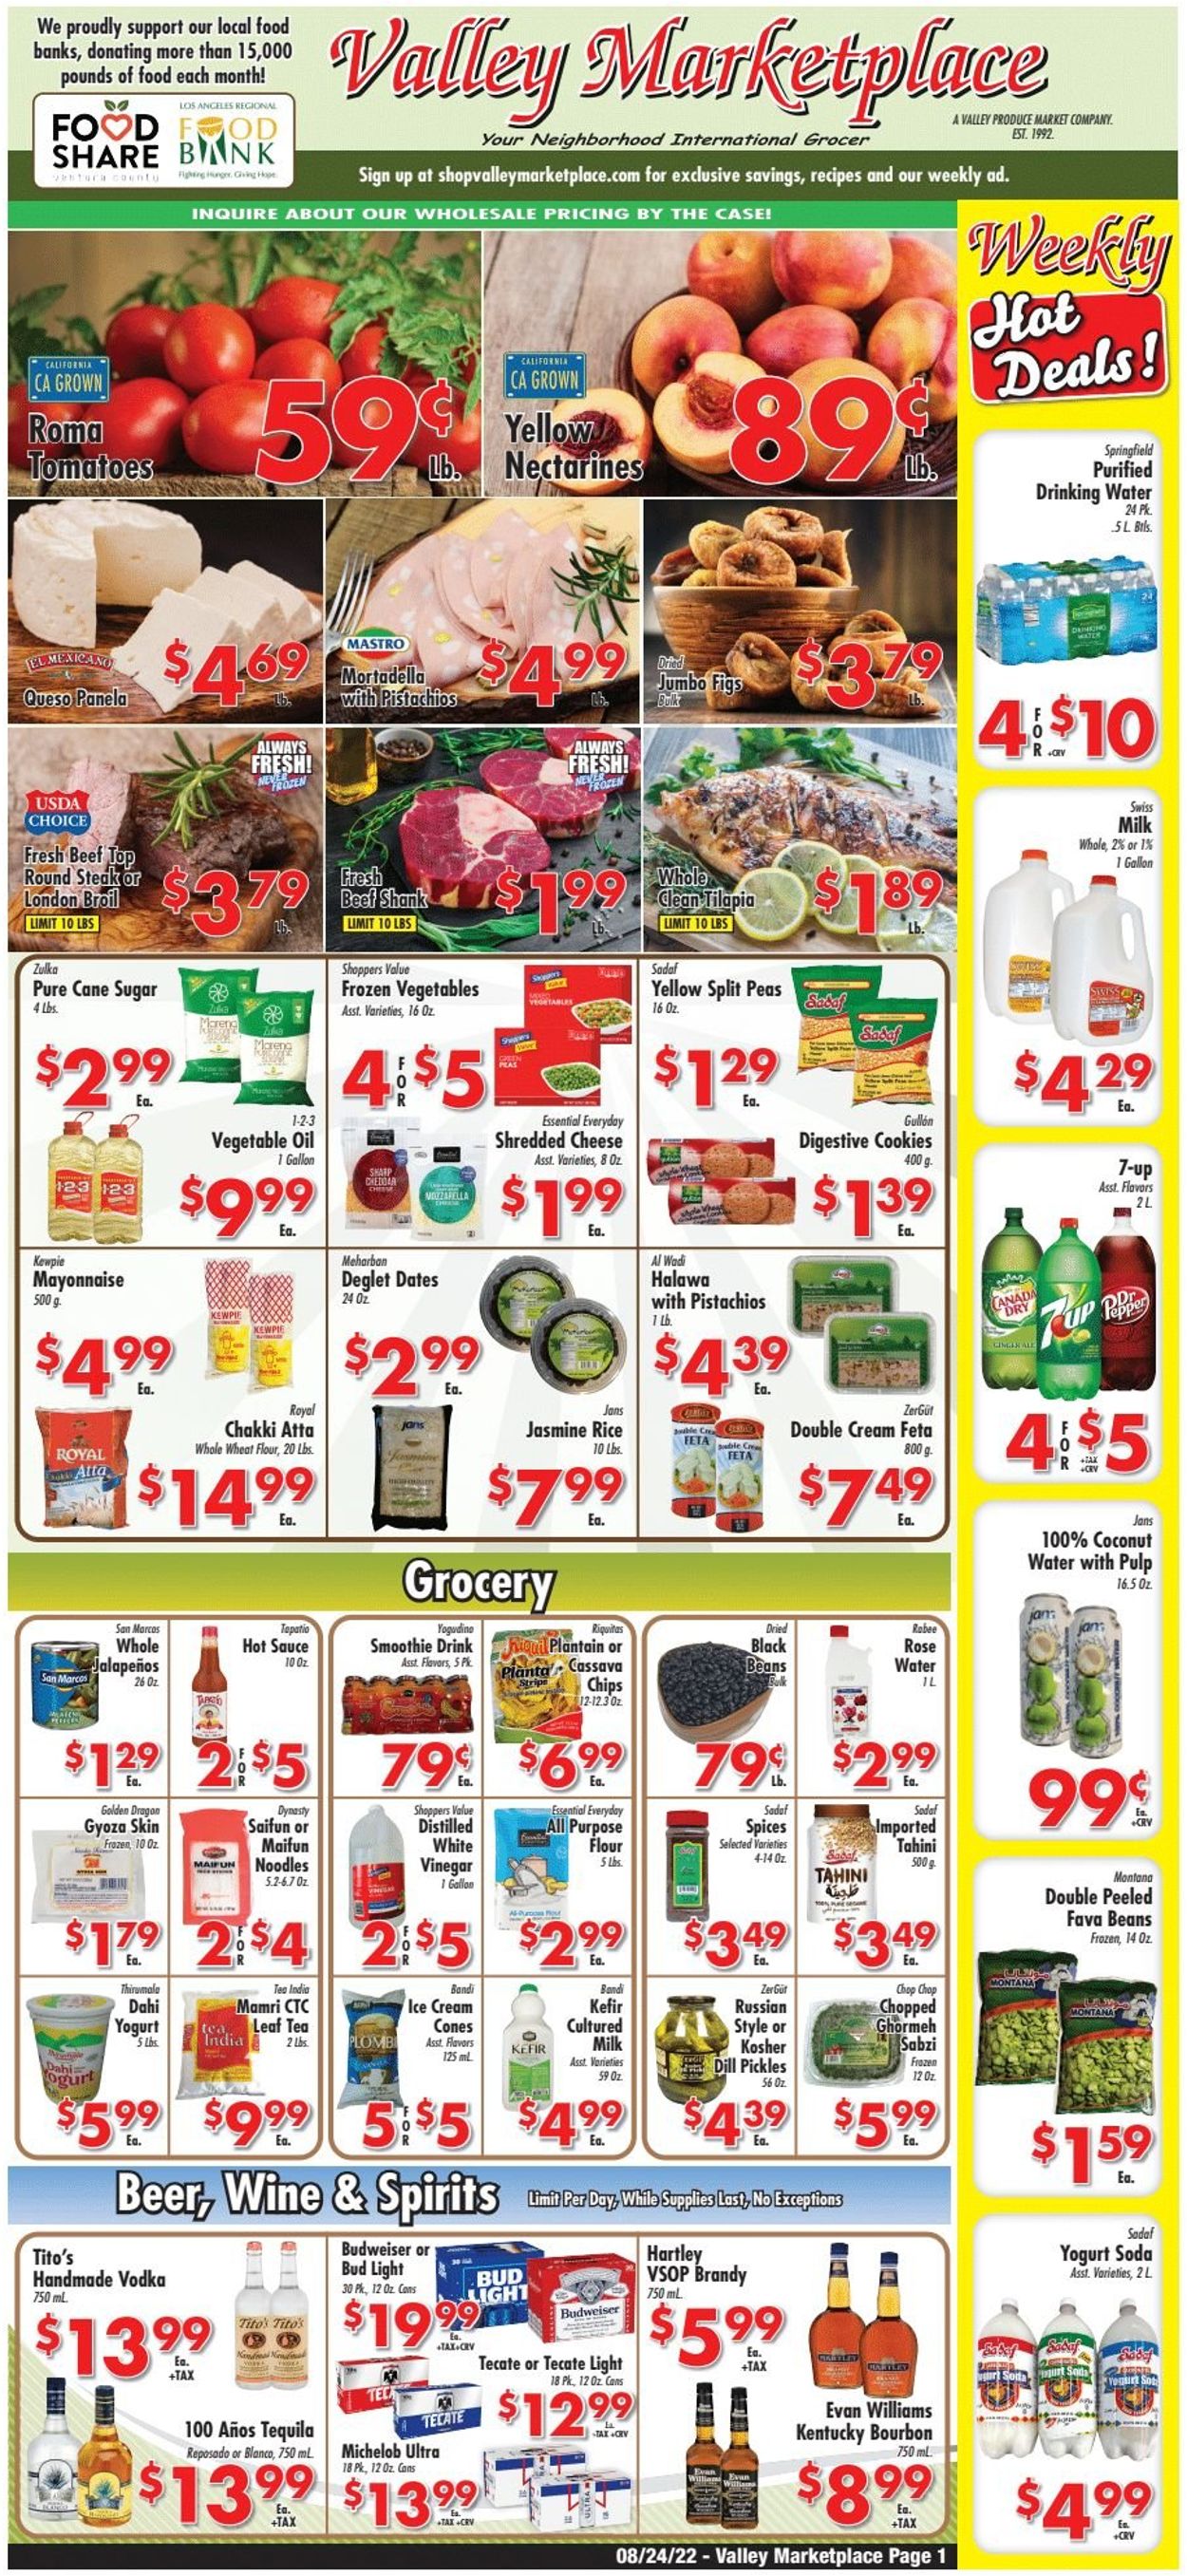 Valley Marketplace Current weekly ad 08/24 - 08/30/2022